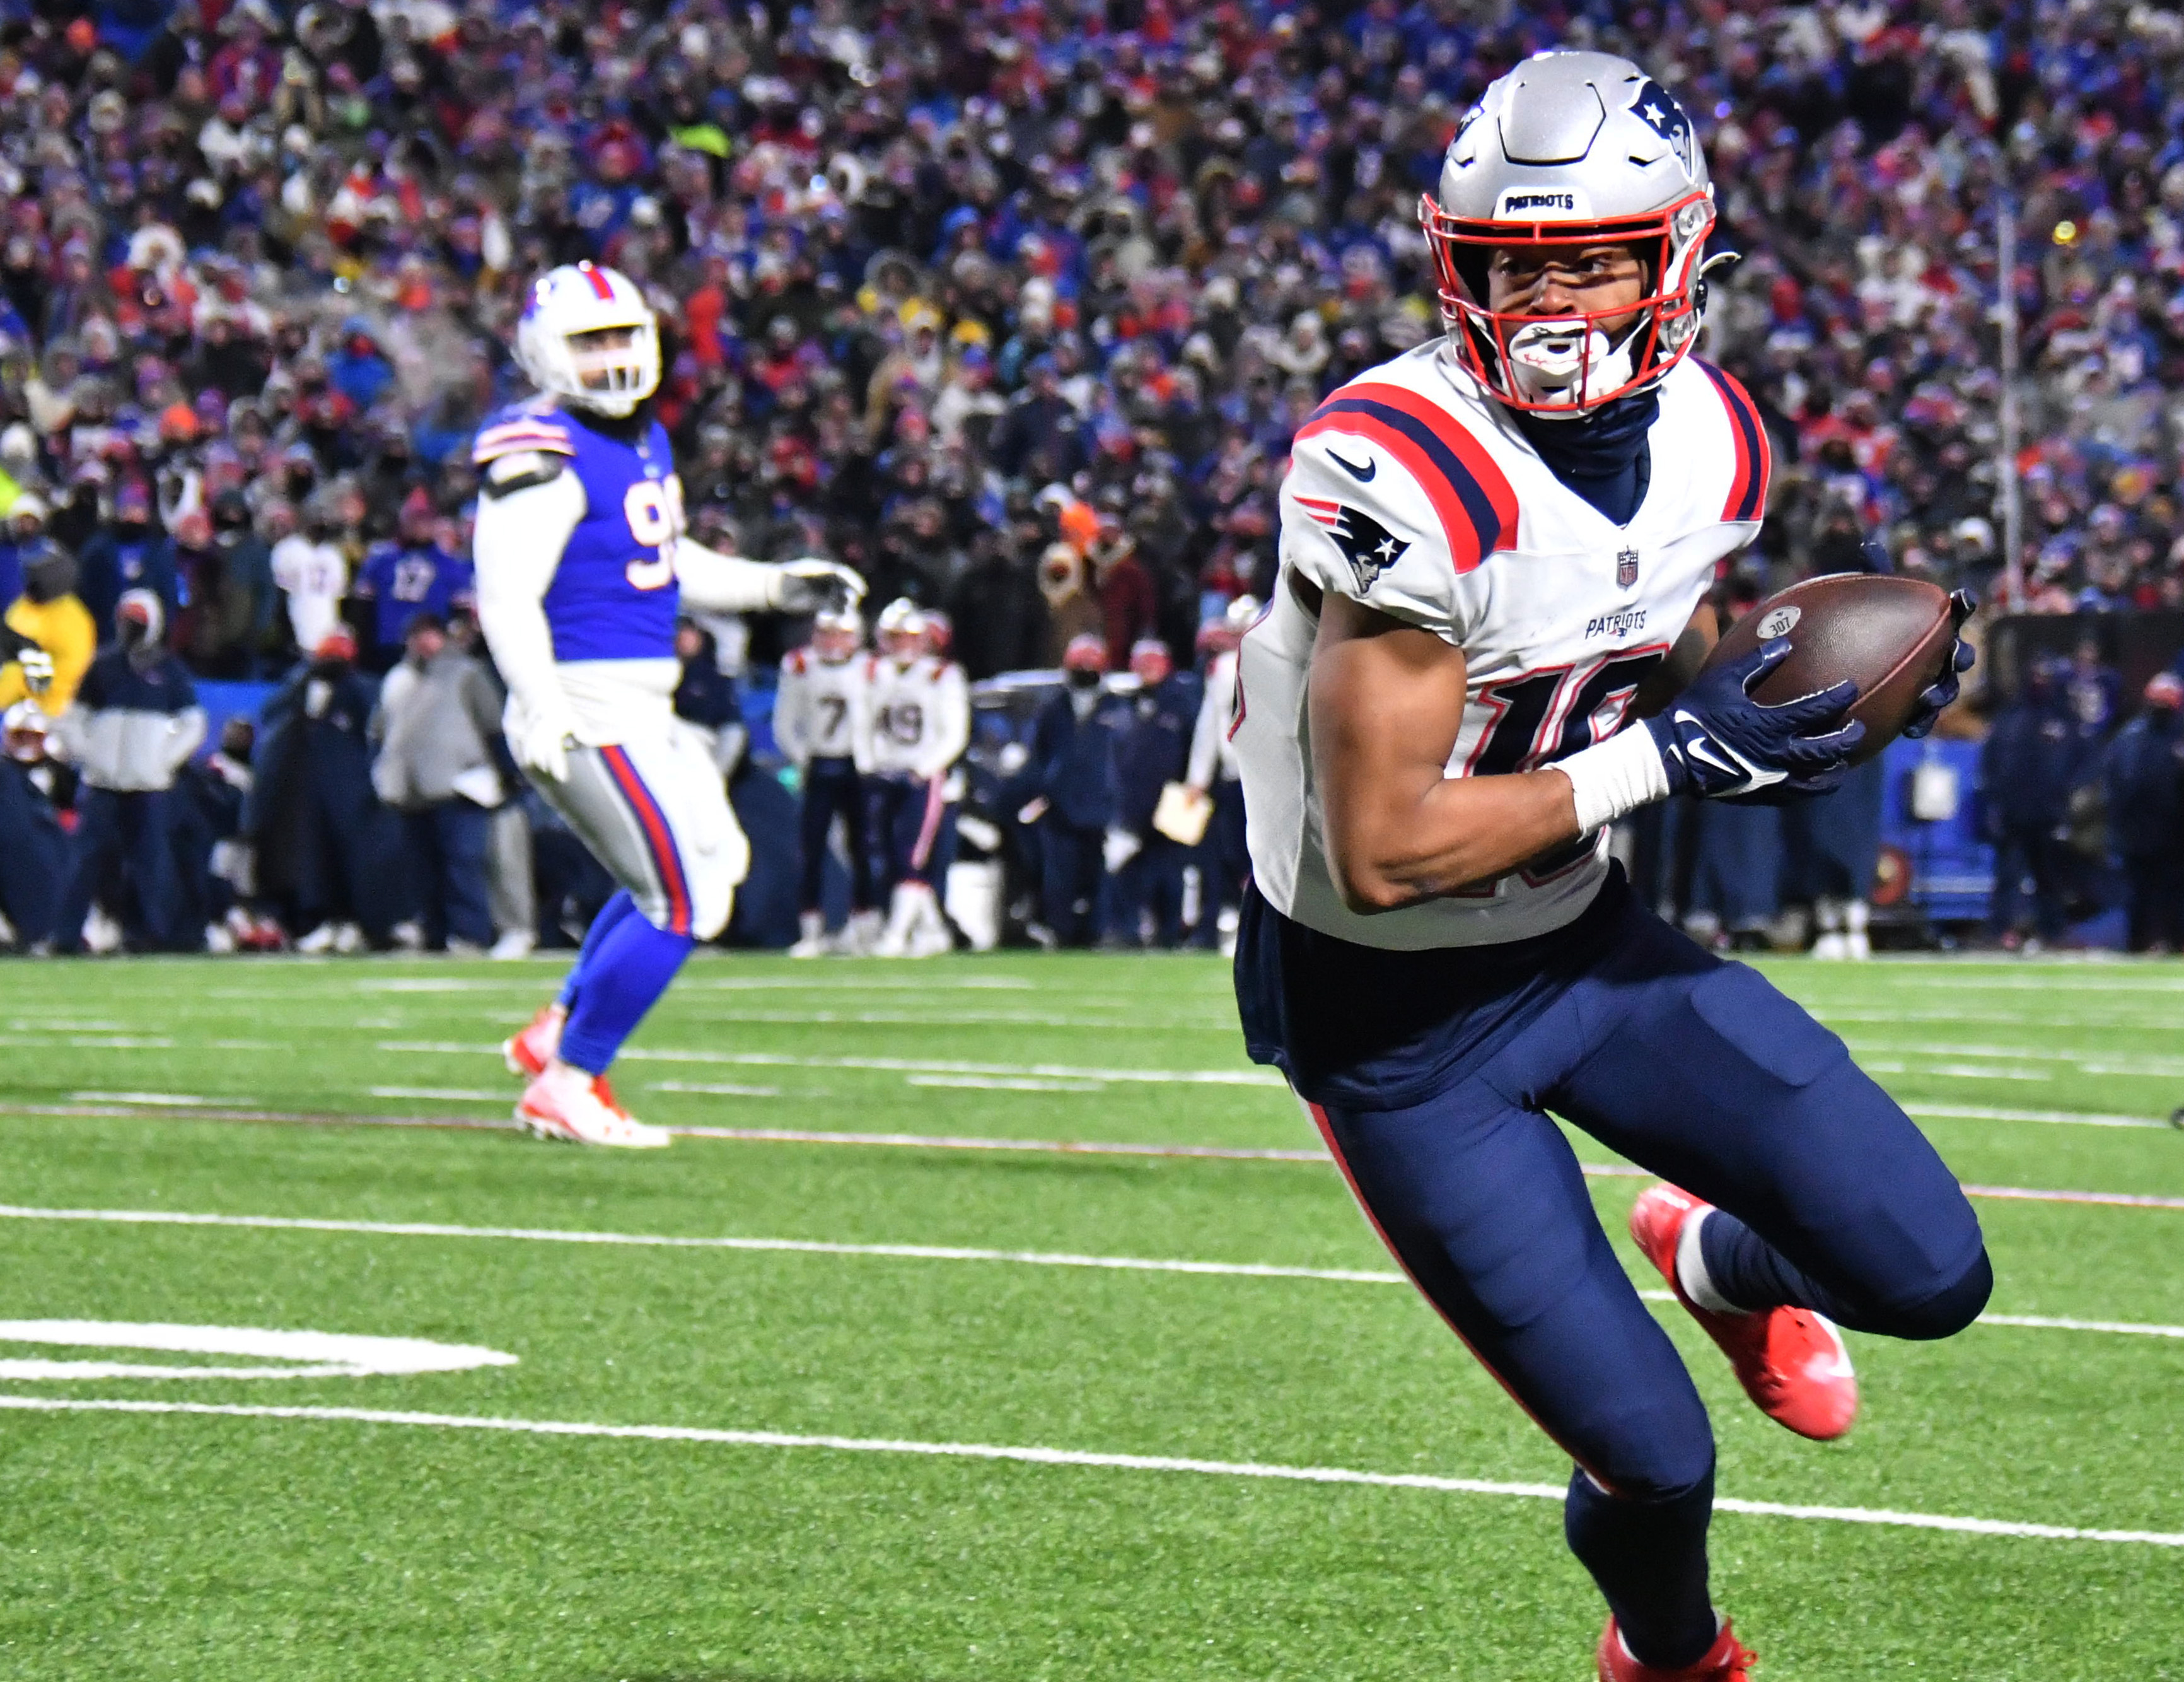 &nbsp;New England Patriots wide receiver Jakobi Meyers (16) runs after a catch in the third quarter of the AFC Wild Card playoff game against the Buffalo Bills at Highmark Stadium.&nbsp;